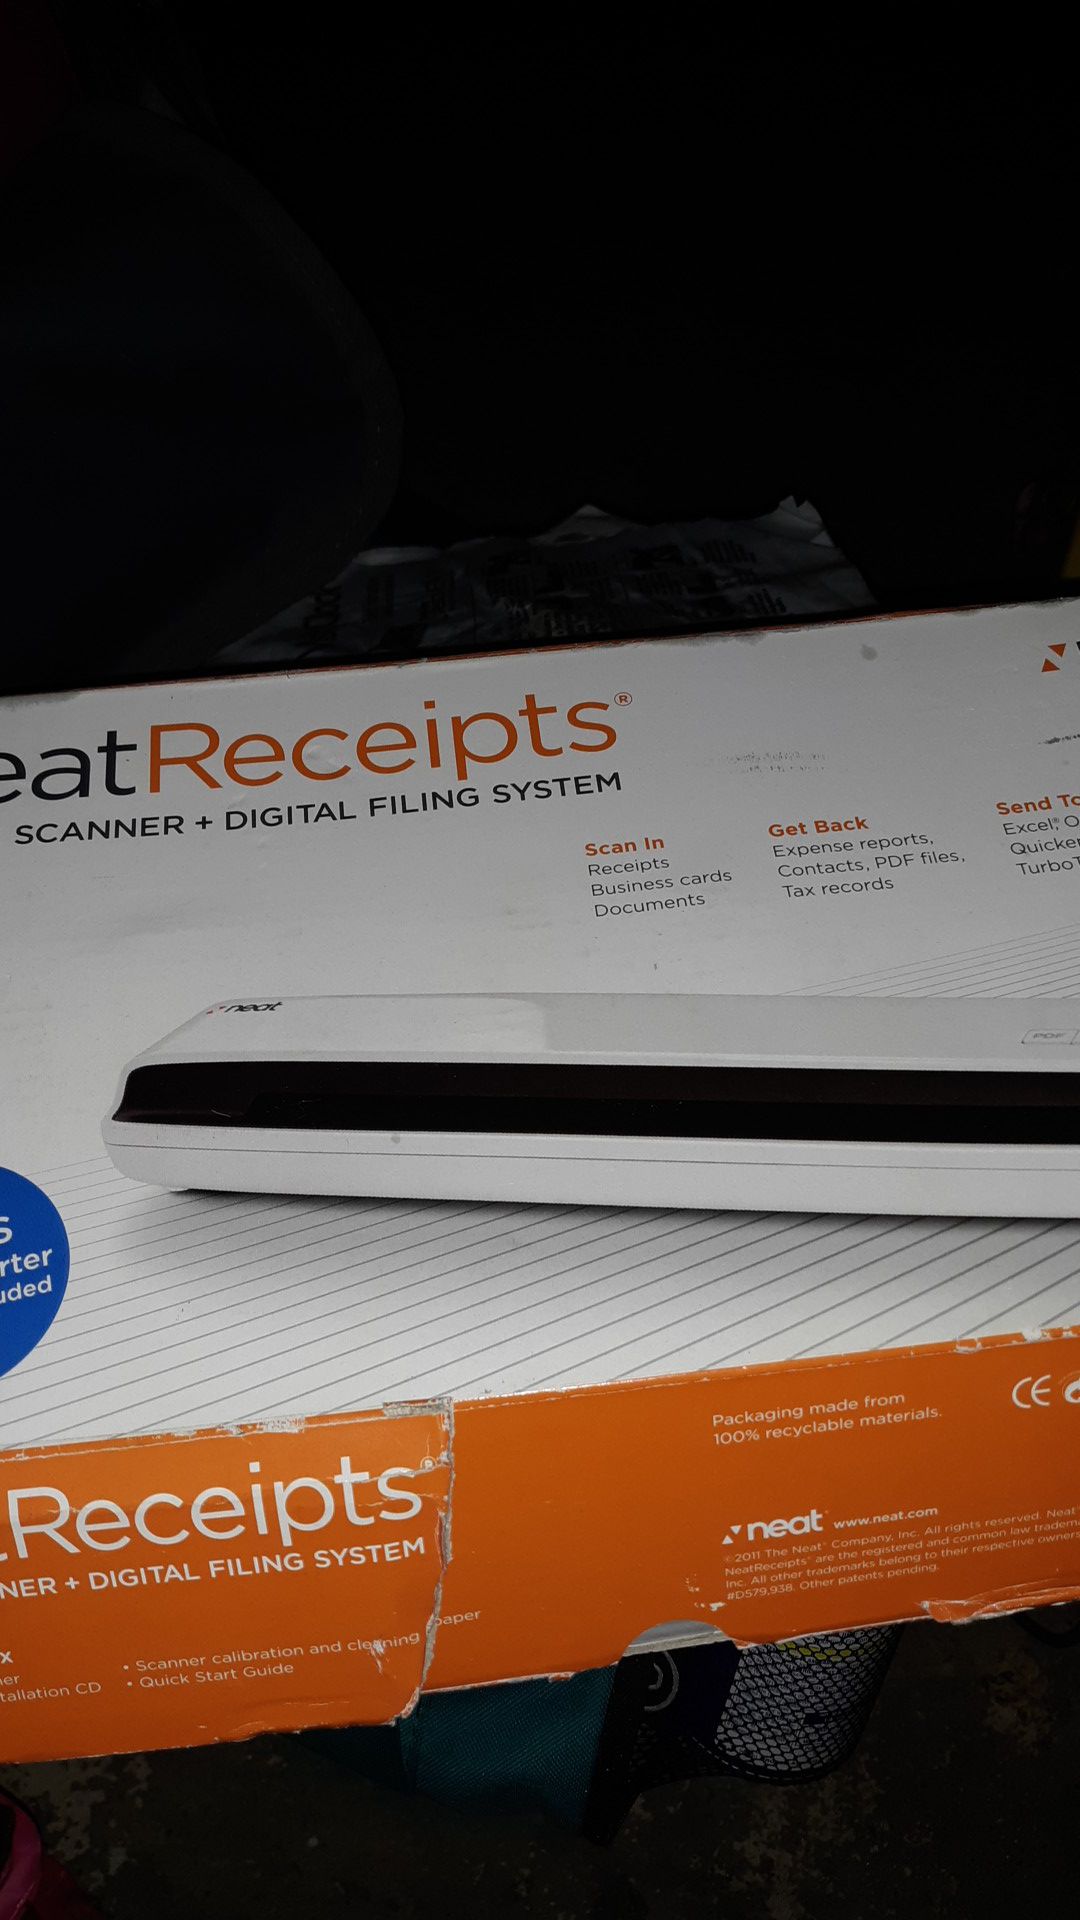 Neat receipts Mobil scanner digital filing system